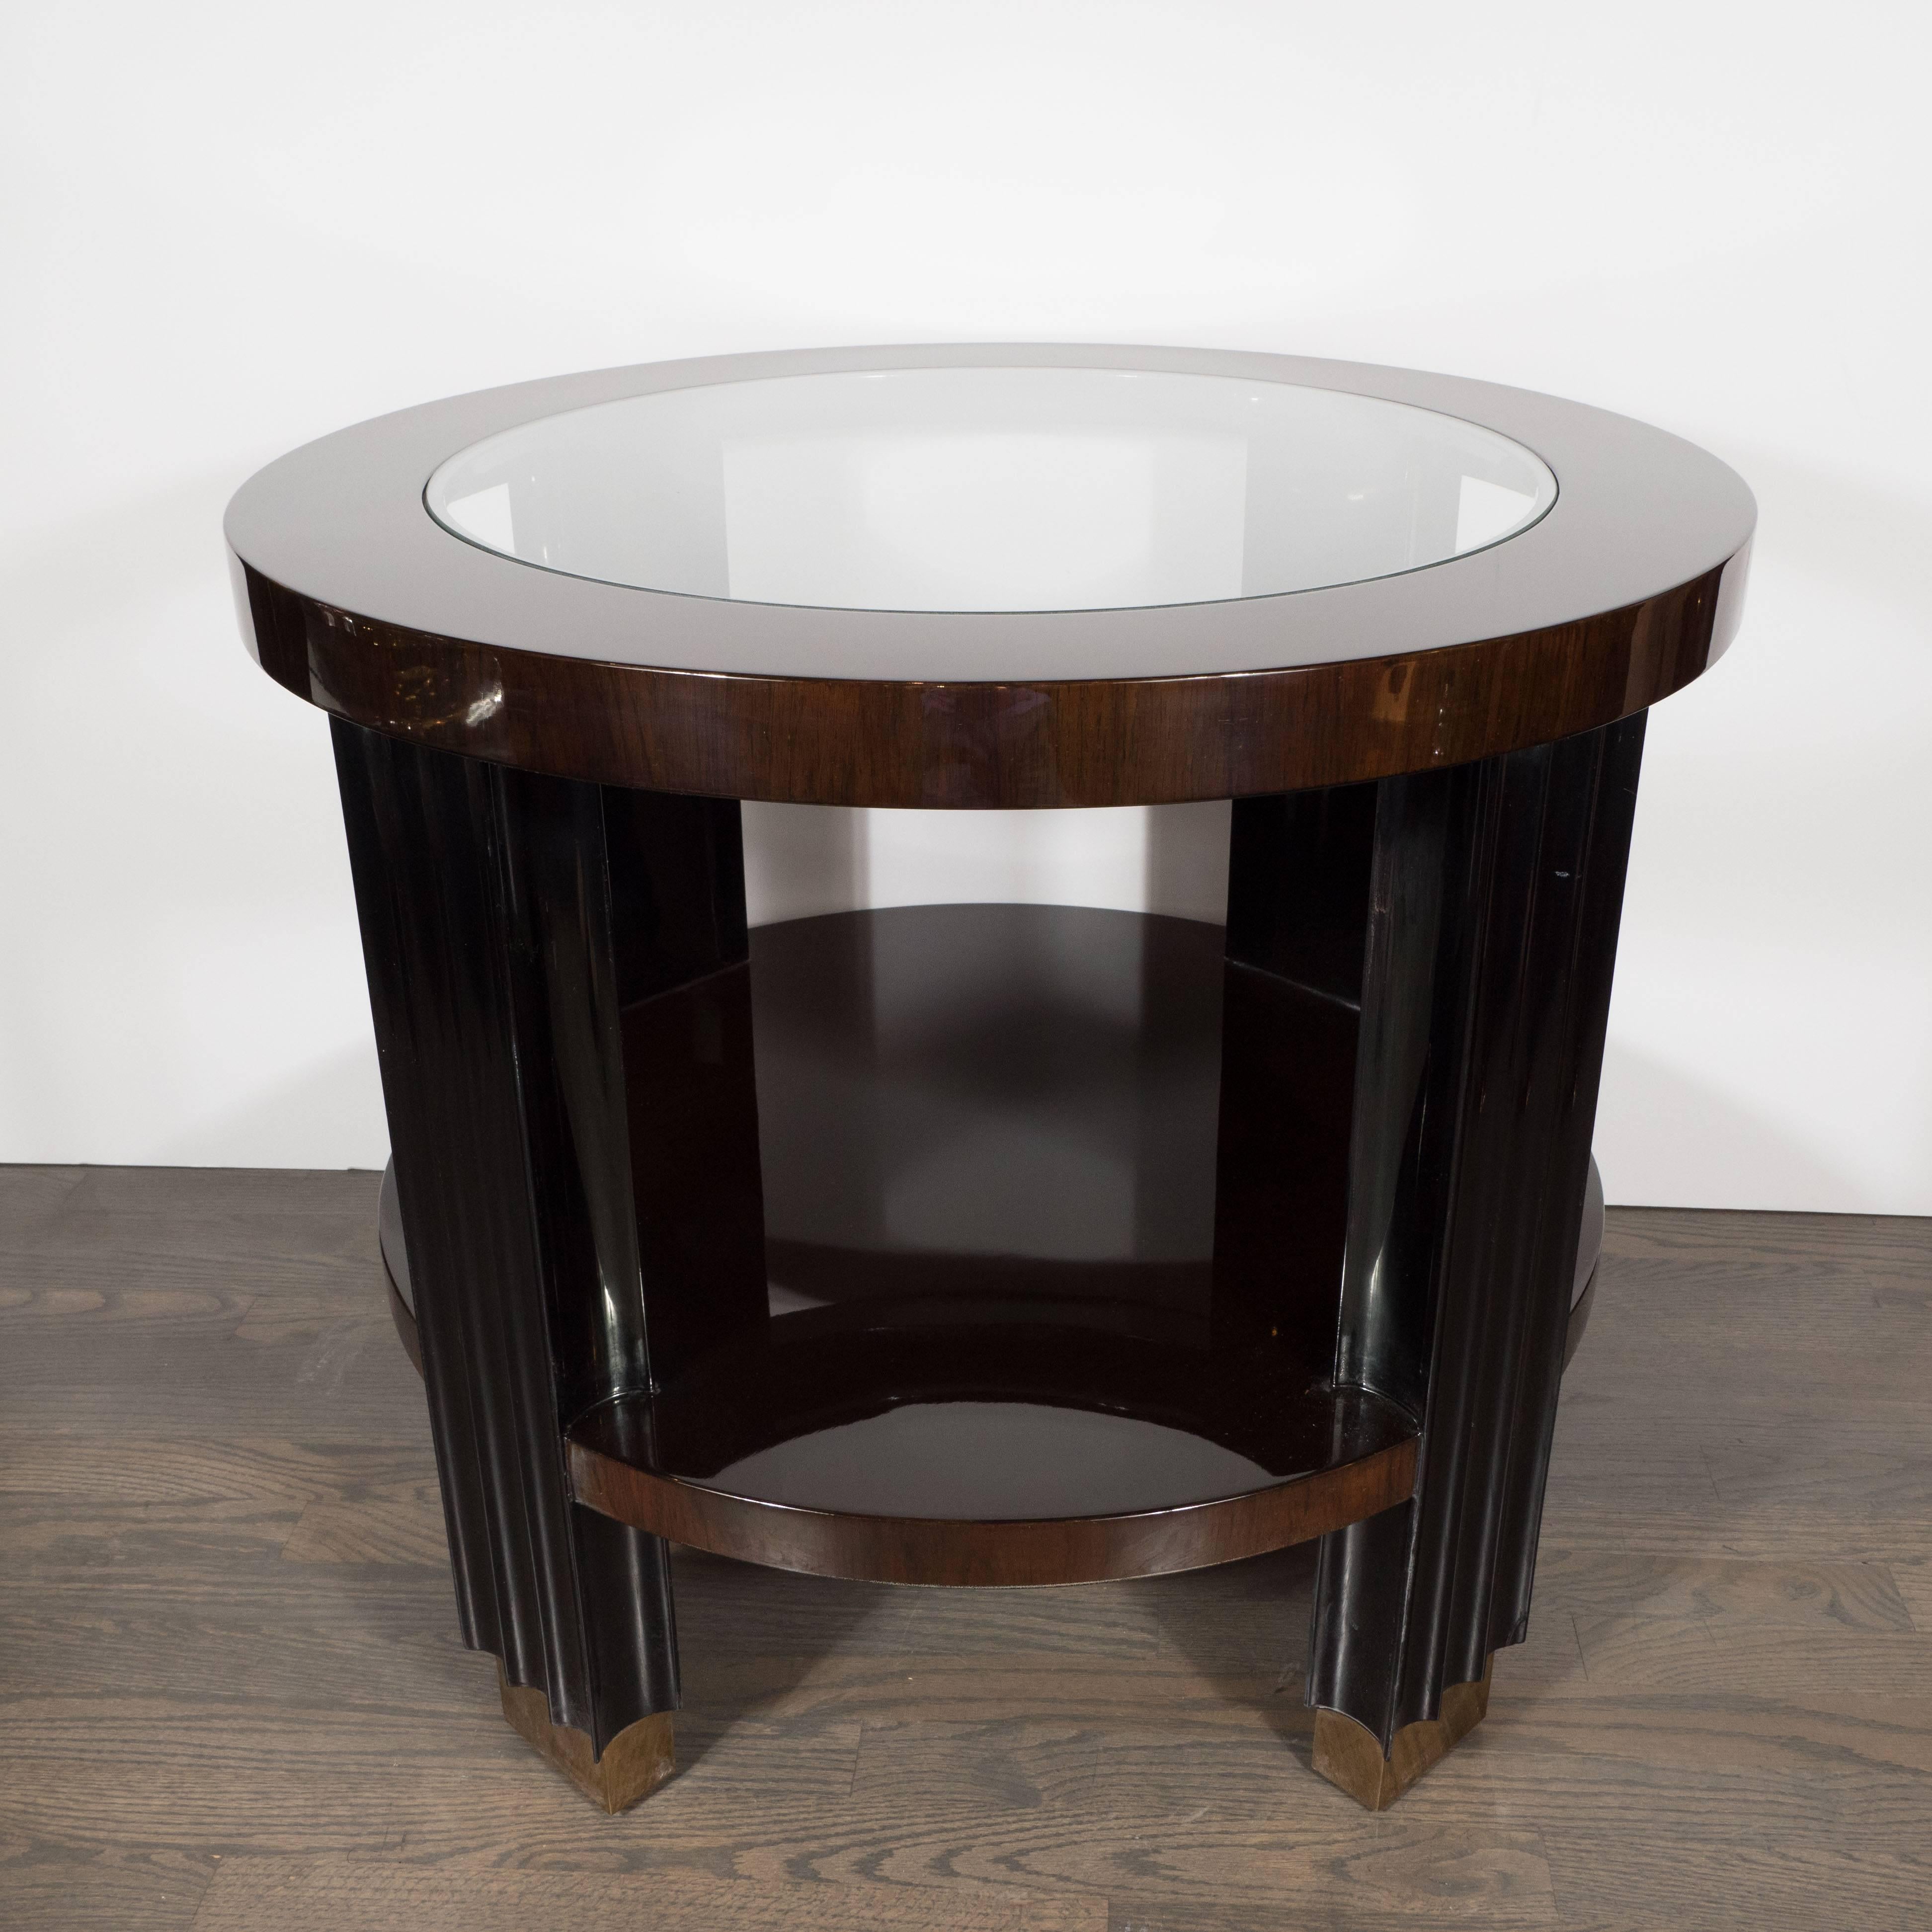 This striking occasional table was realized in the United States towards the end of the 20th century, likely in the 1980s. It features two table tops made of walnut- the top one has a circular glass insert in the center. The table is supported by